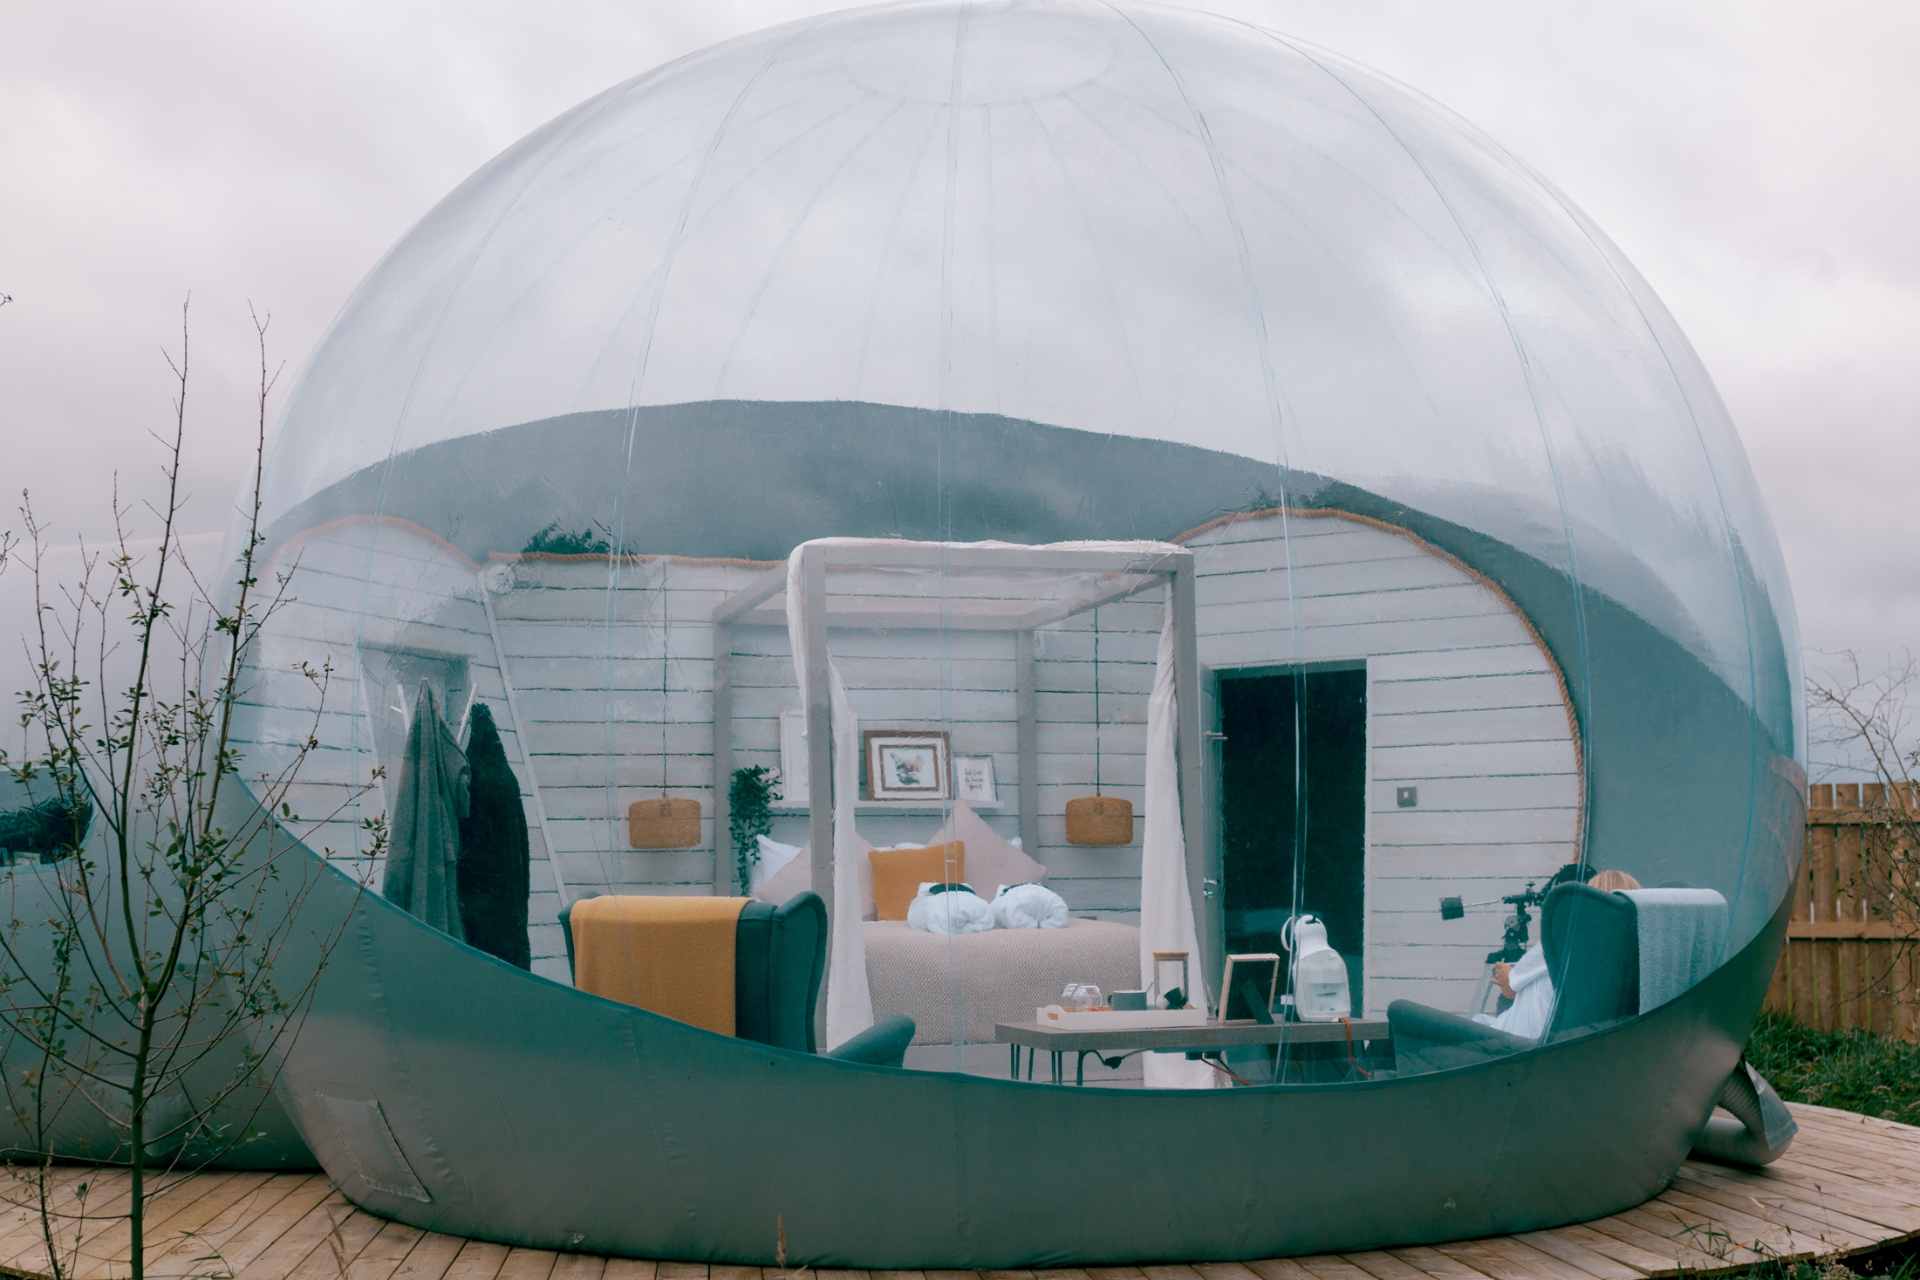 foxborough-bubble-den-on-decking-with-four-poster-bed-glamping-northern-ireland